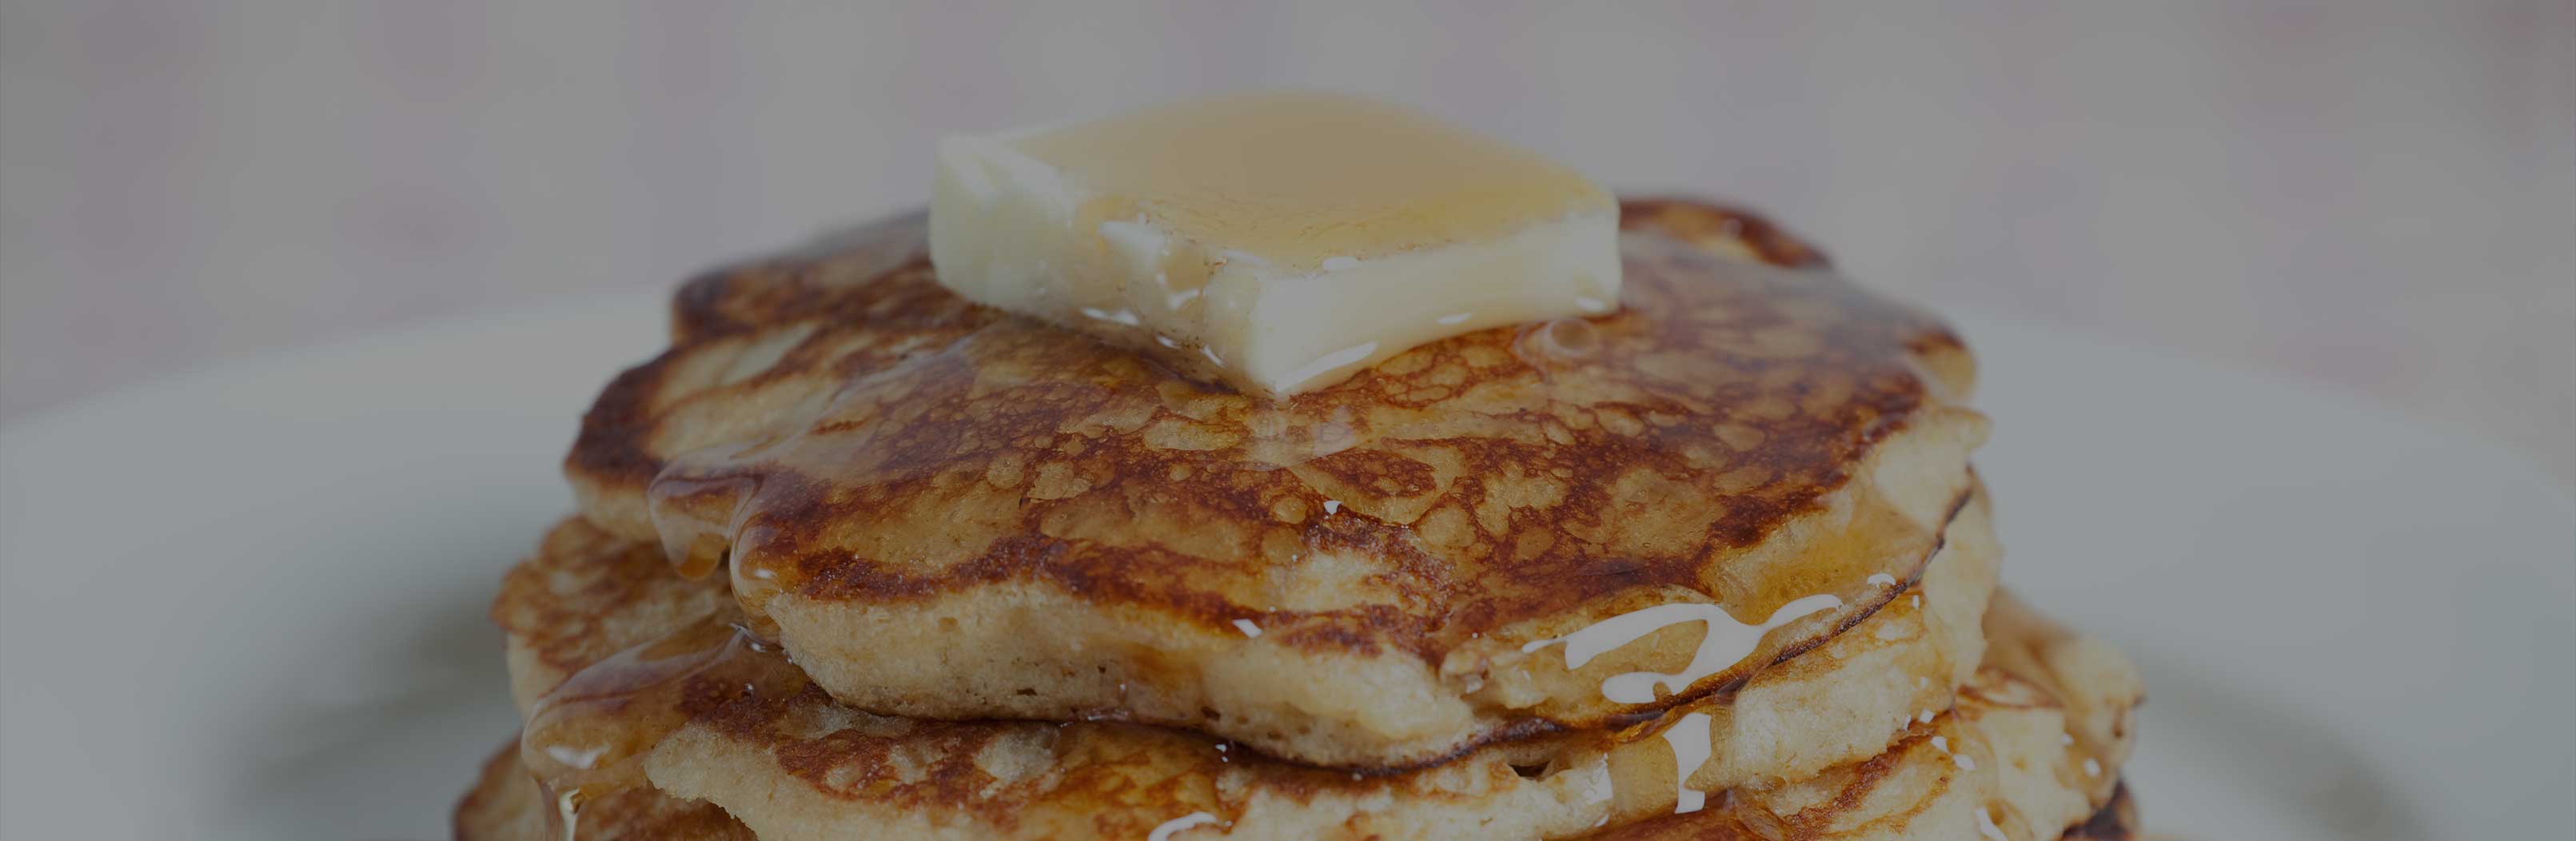 Peanut Butter Cookie Protein Pancakes